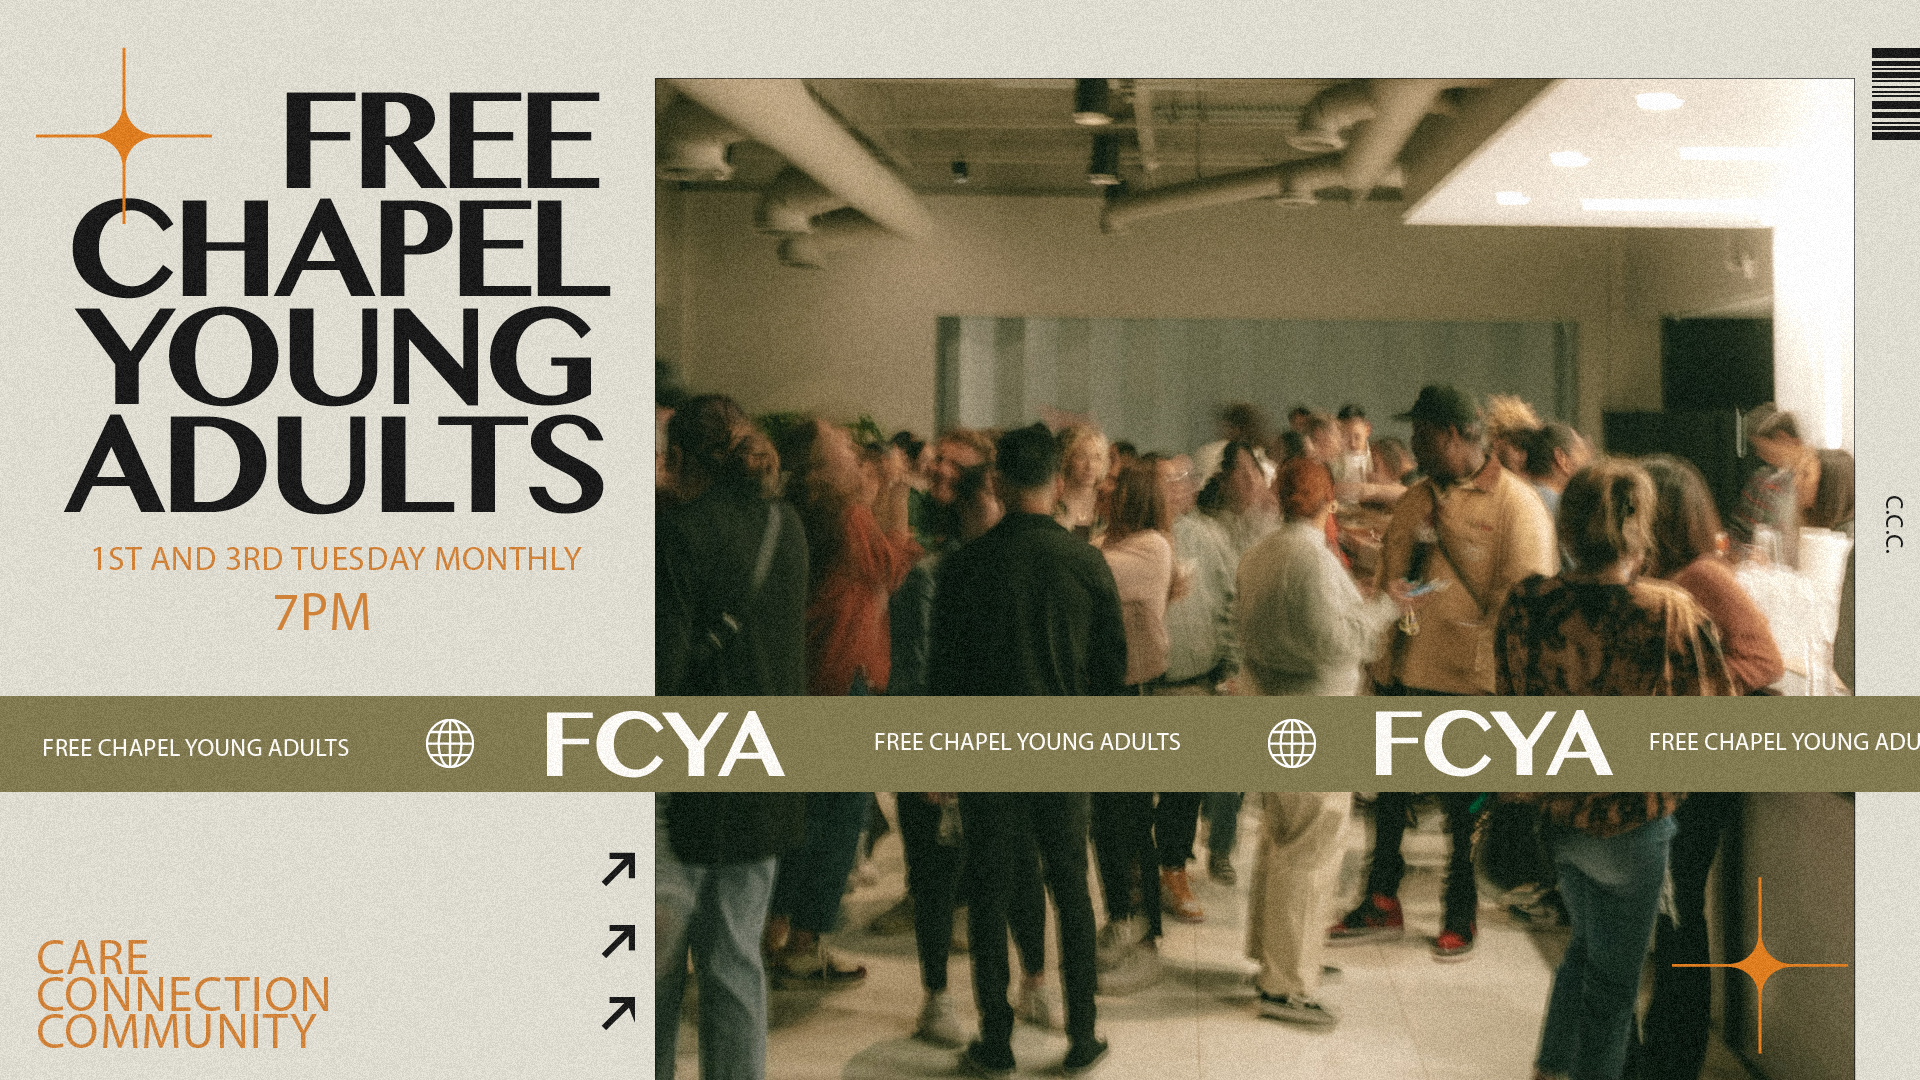 FCYA: First & Third Tuesday at the Gainesville campus